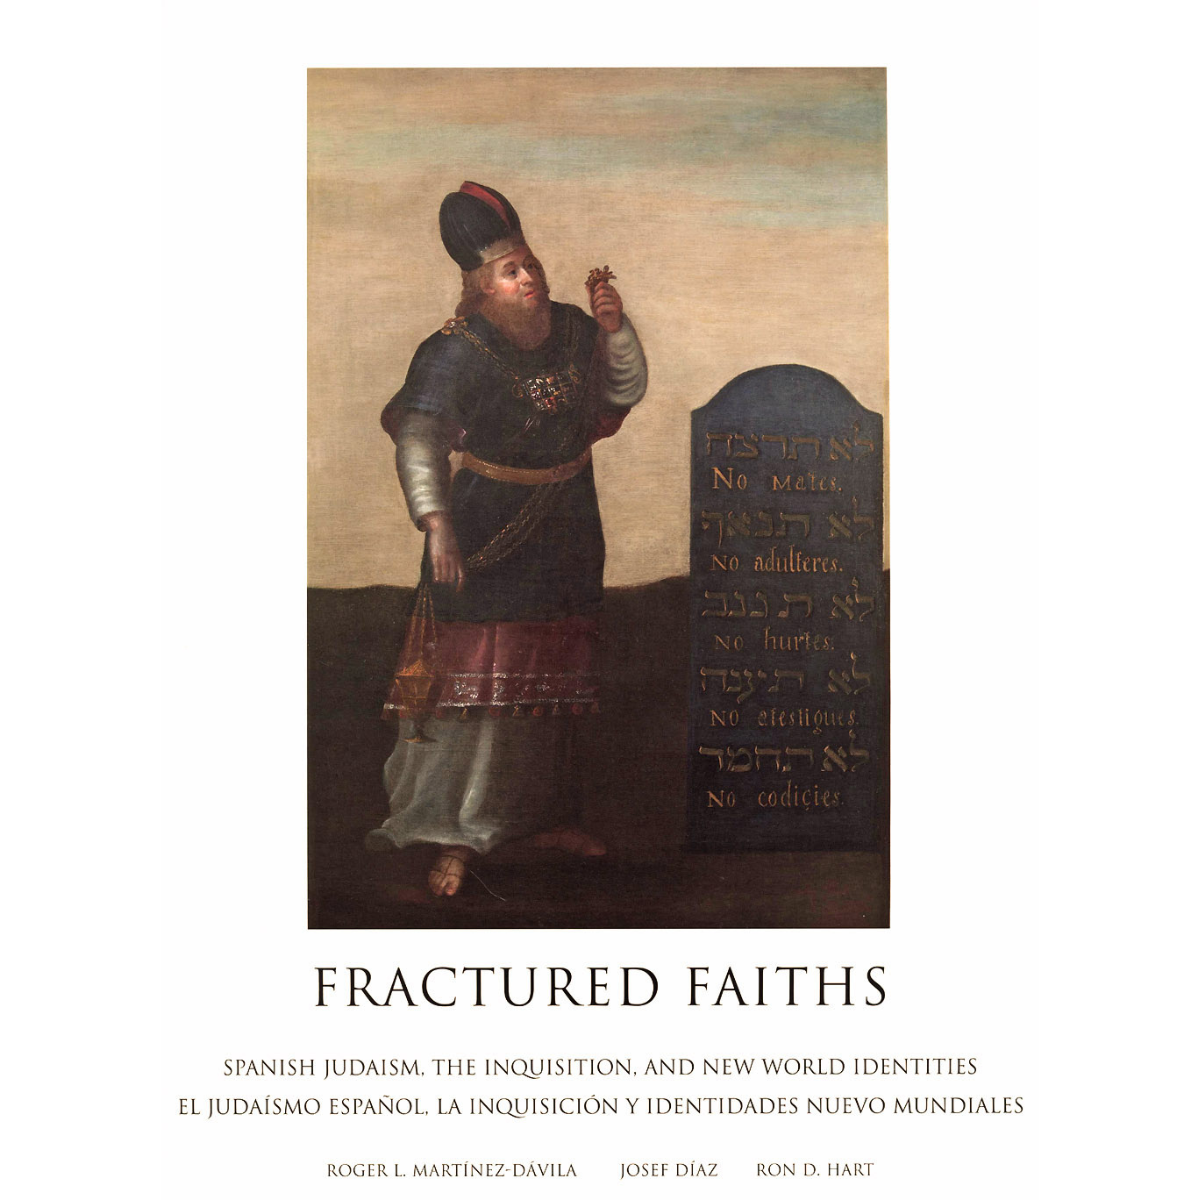 Fractured Faiths: Spanish Judaism, the Inquisition, and New World Identities